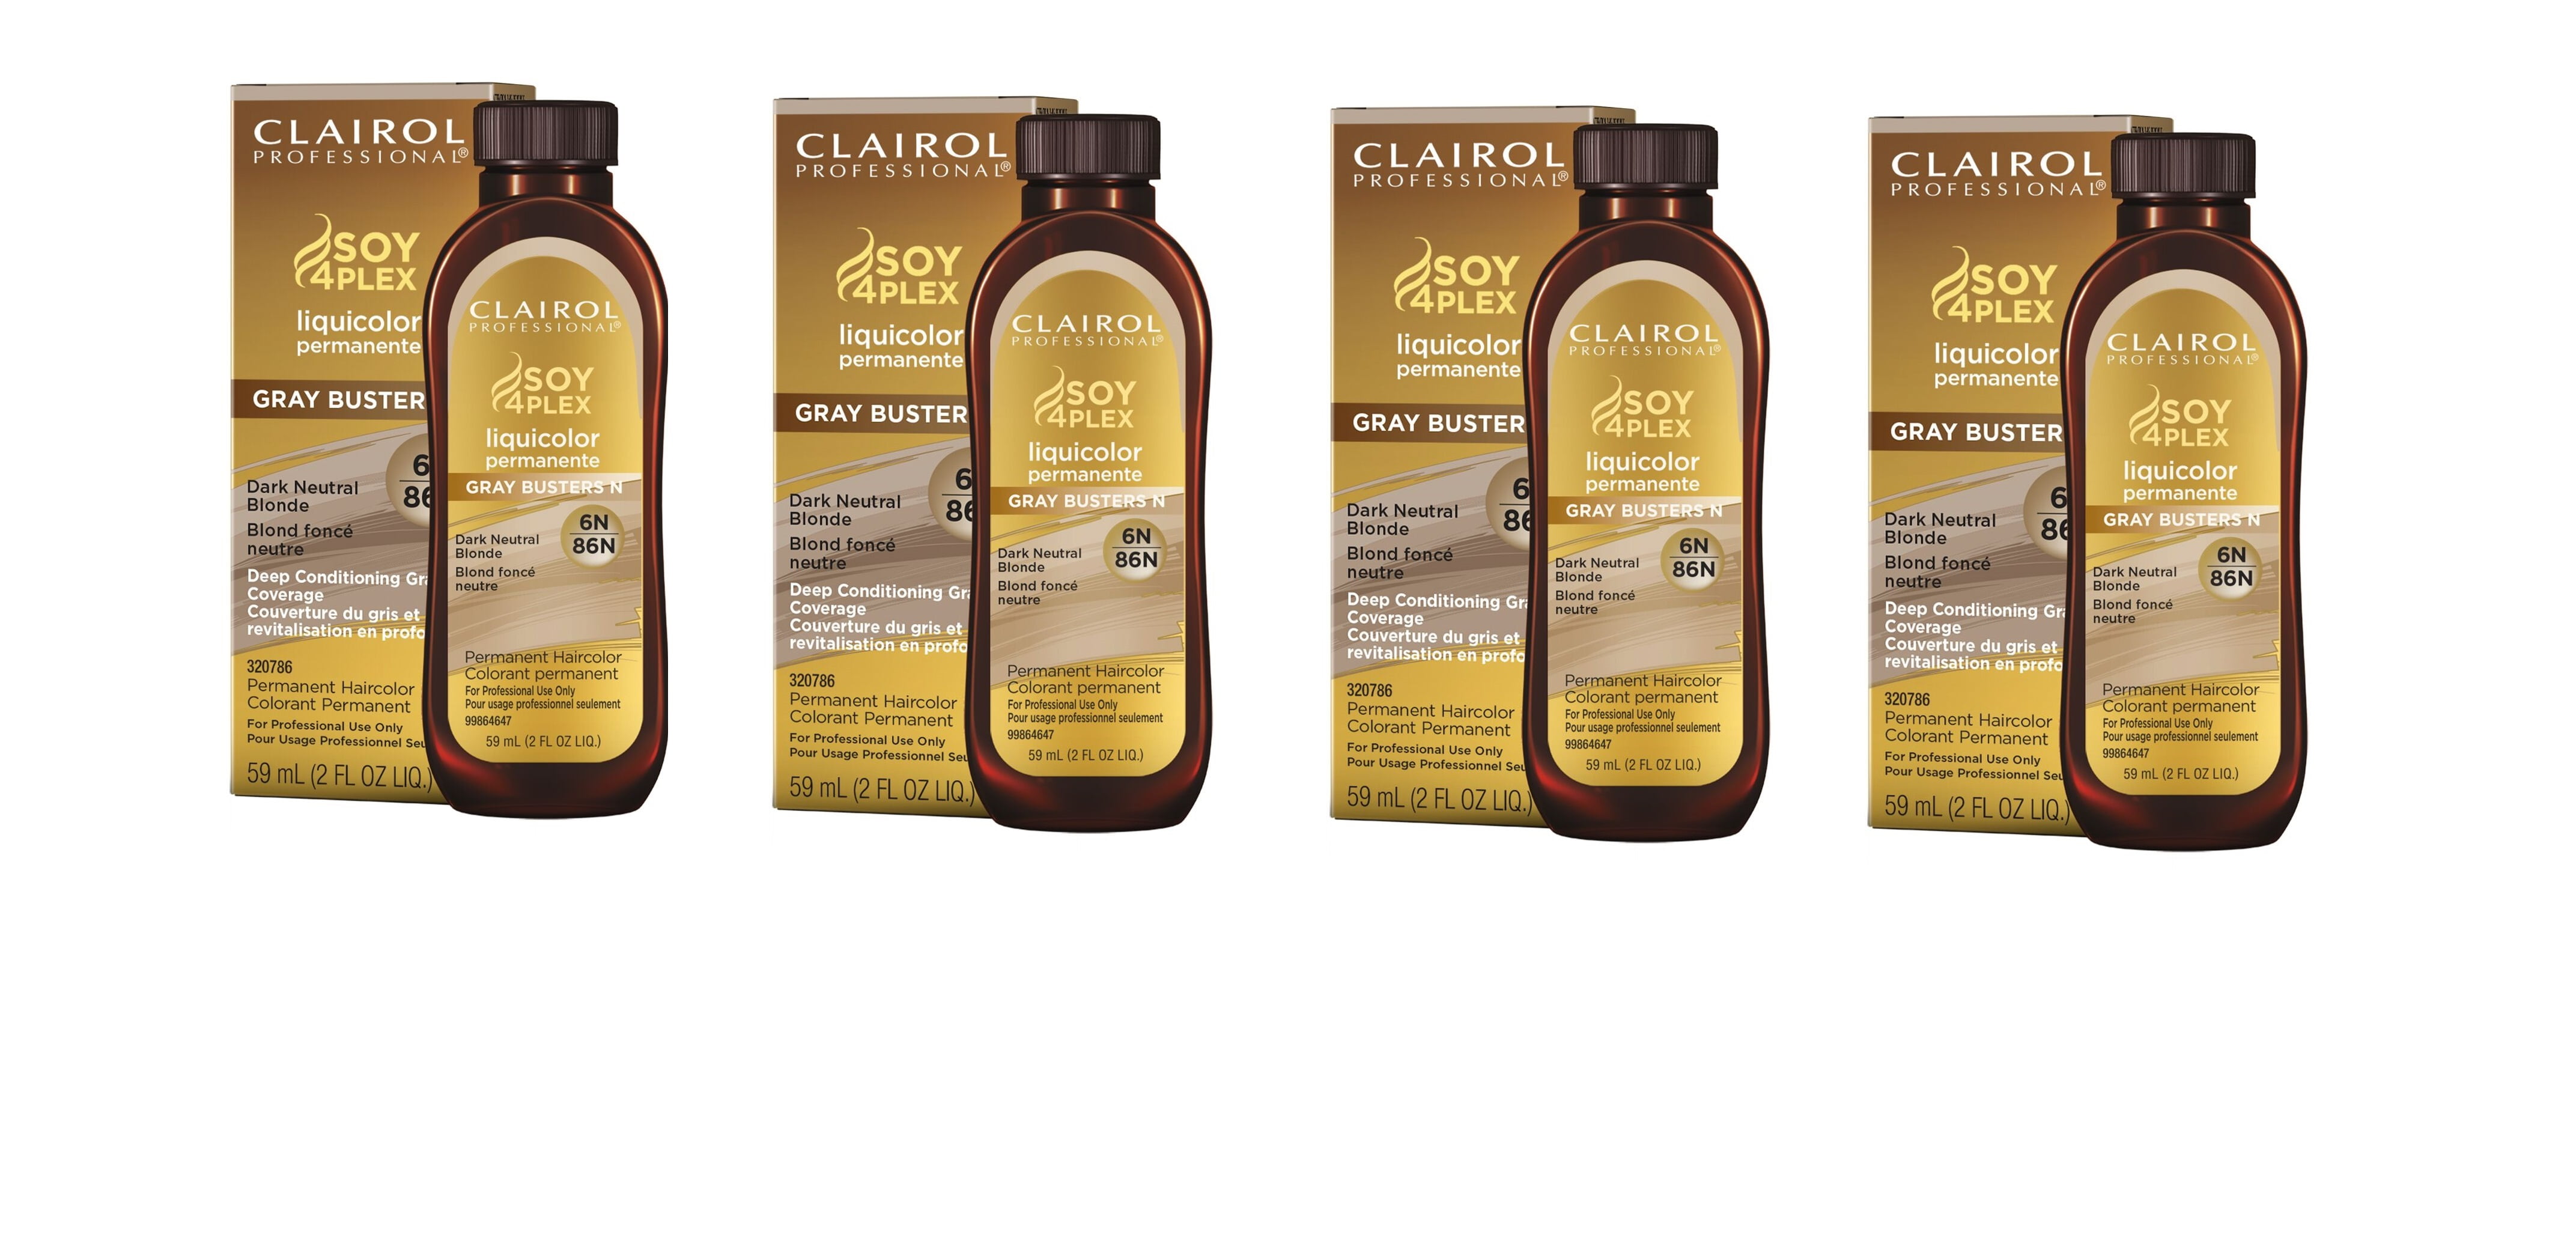 8. Clairol Professional Soy4Plex Pure White Creme Hair Color, 10A Lightest Cool Blonde - wide 1